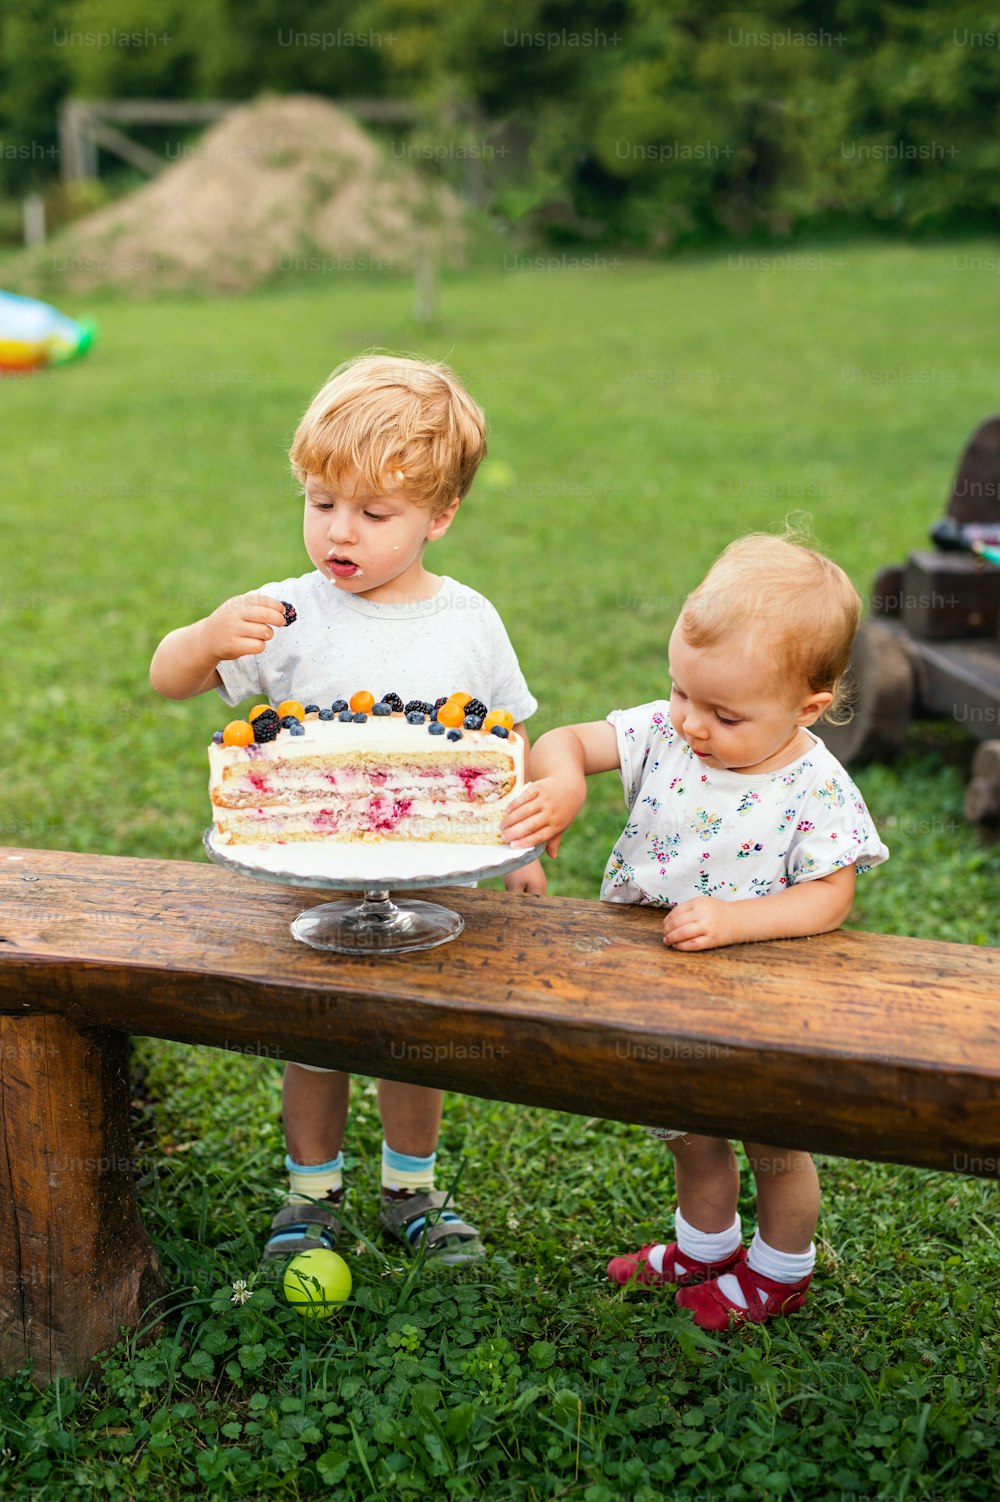 Front view of two toddler children with birthday cake outdoors in garden in summer.